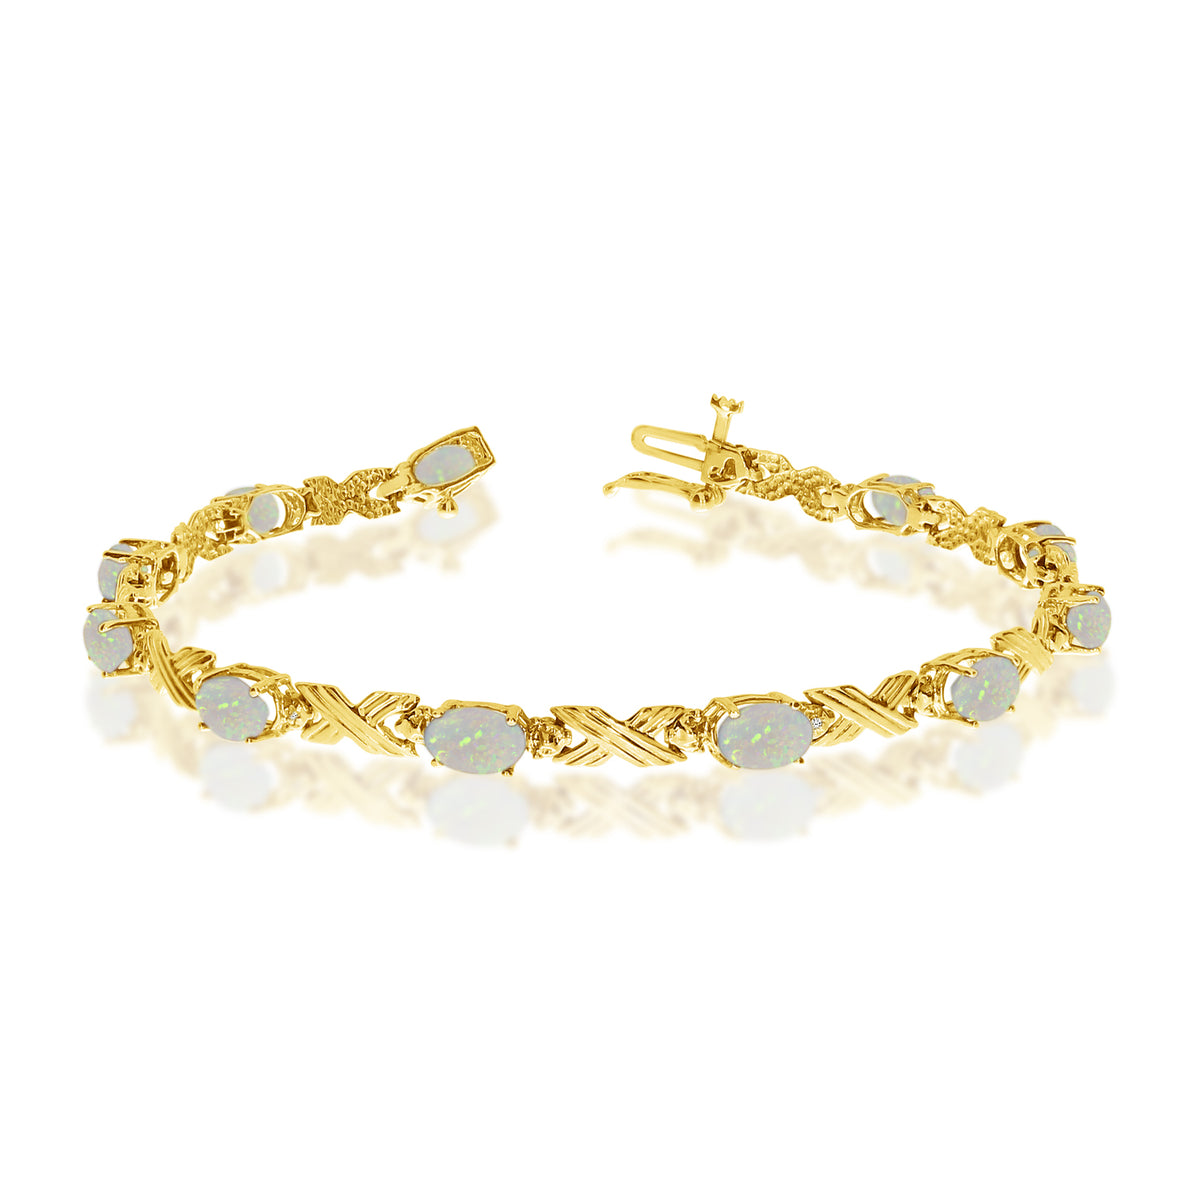 14K Yellow Gold Oval Opal Stones And Diamonds Tennis Bracelet, 7" fine designer jewelry for men and women